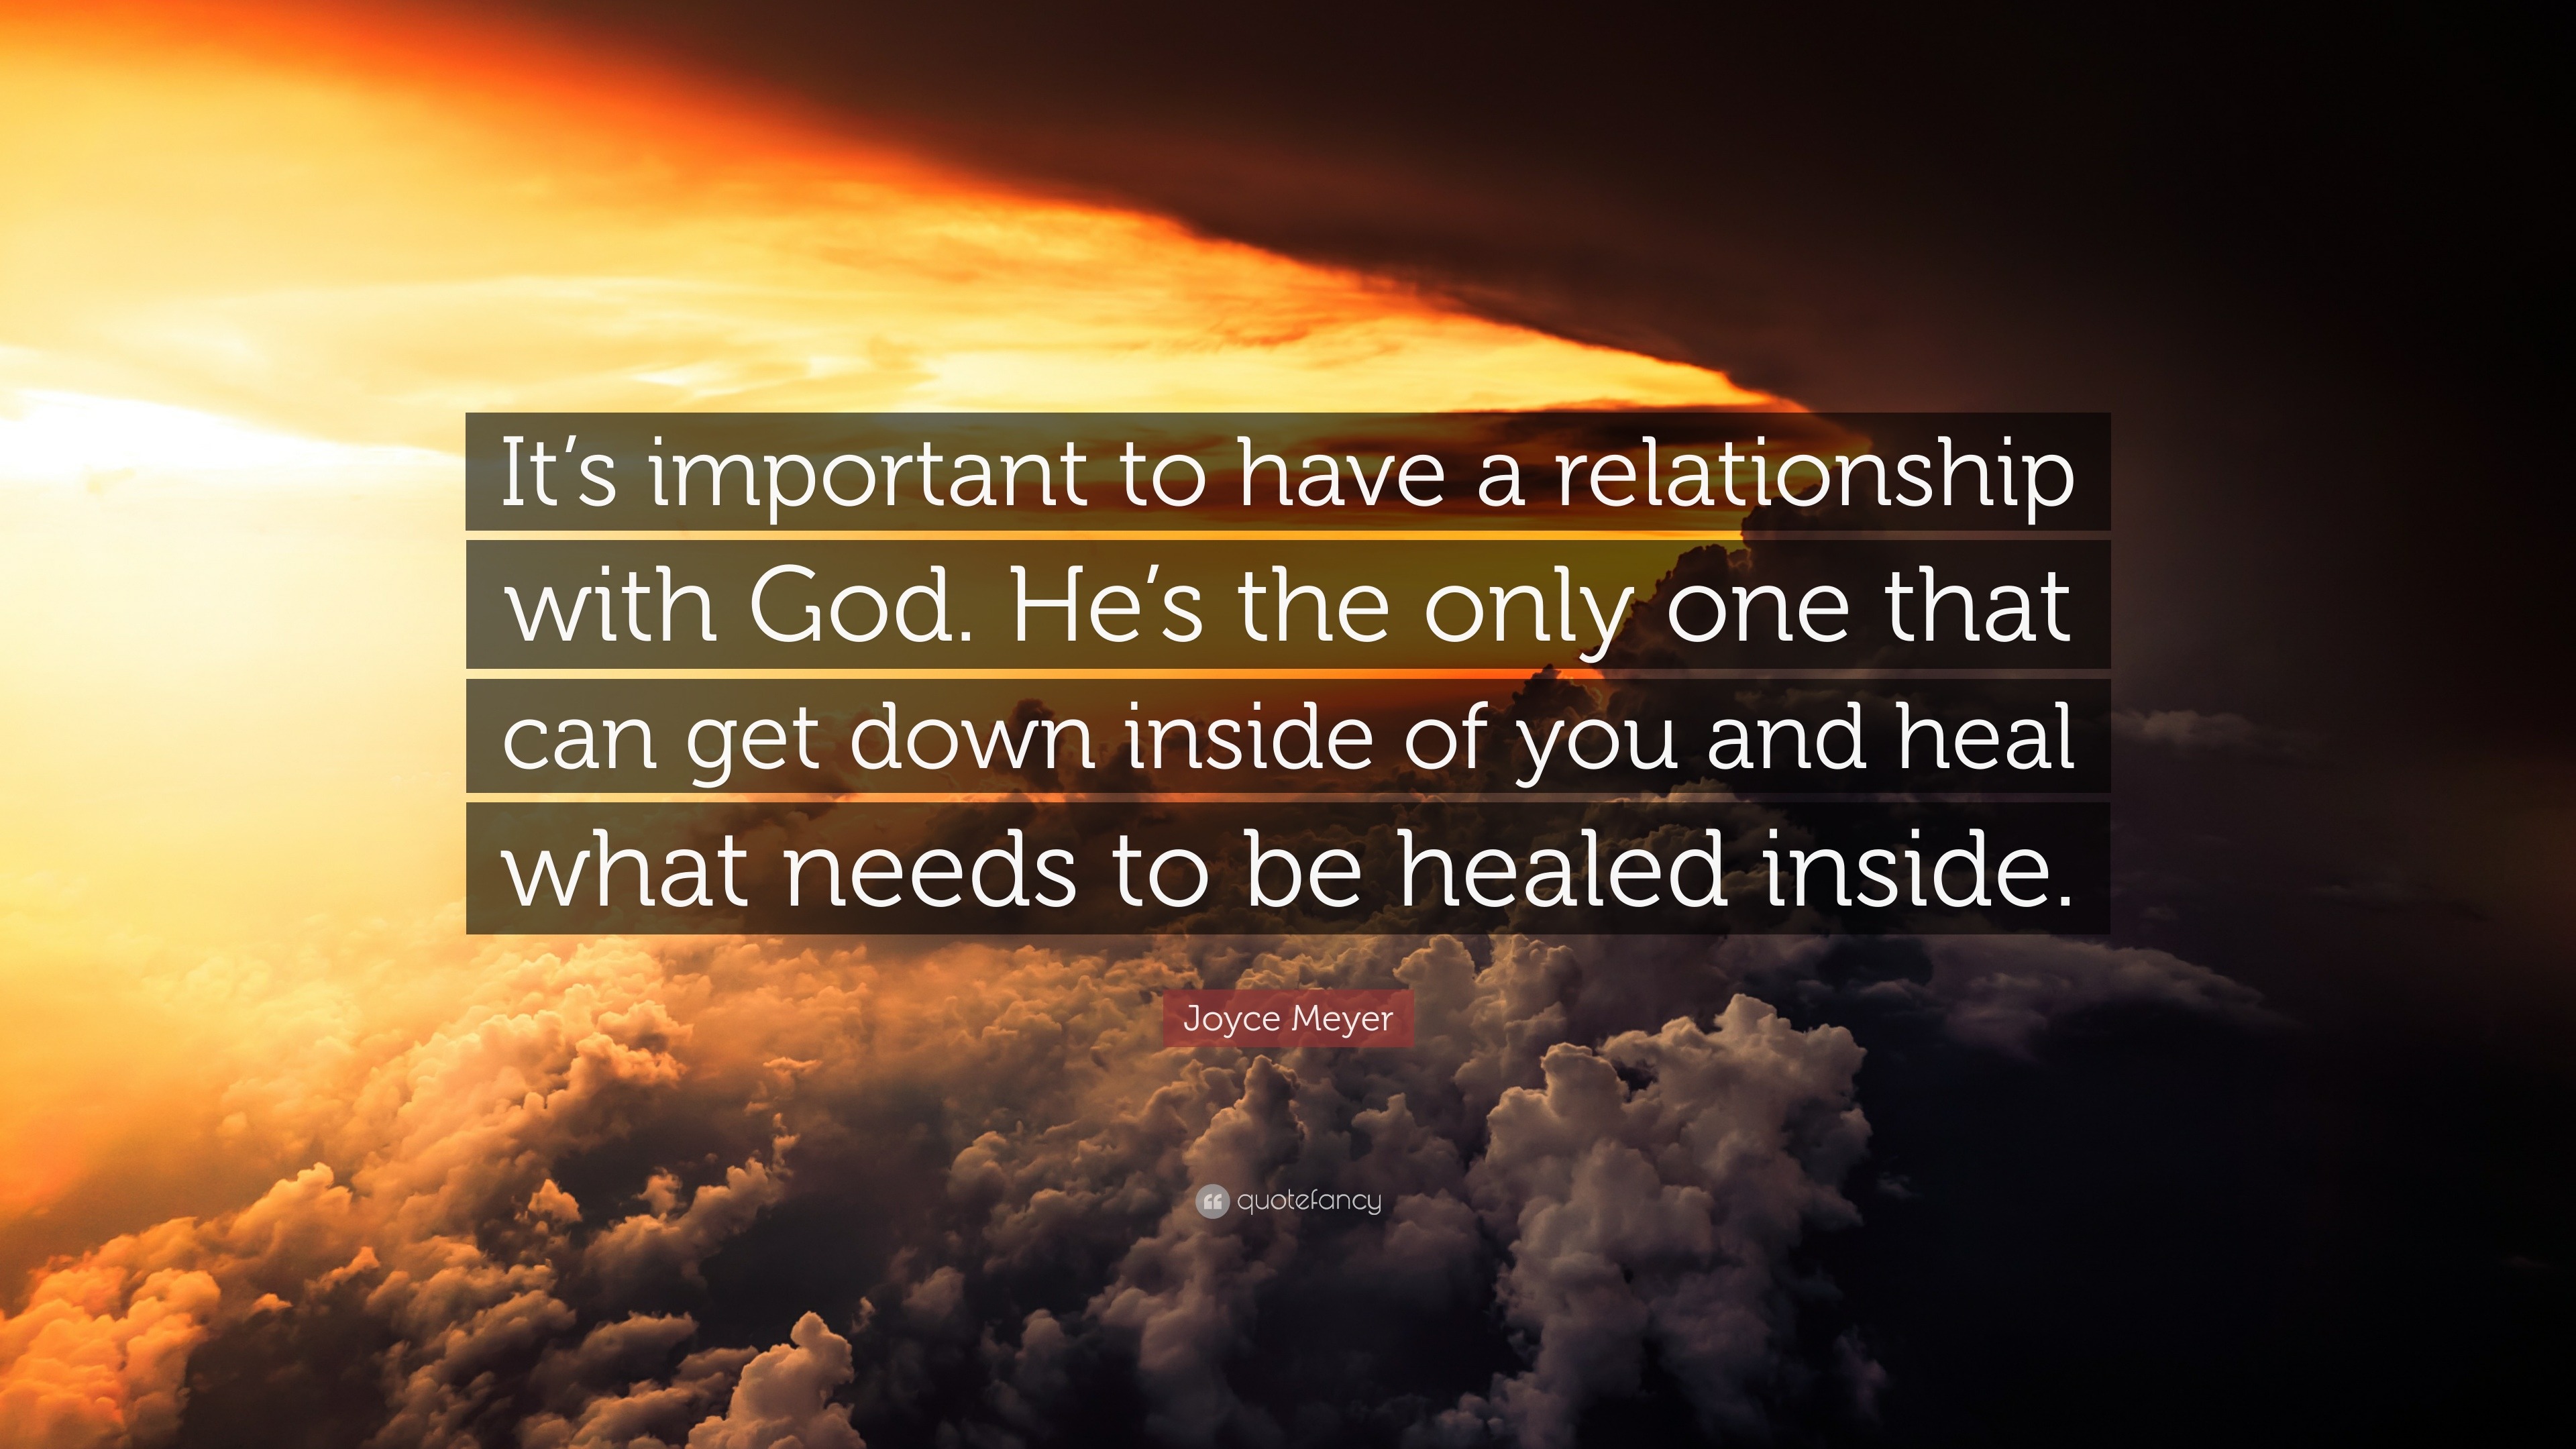 Joyce Meyer Quote  It s important to have a relationship  